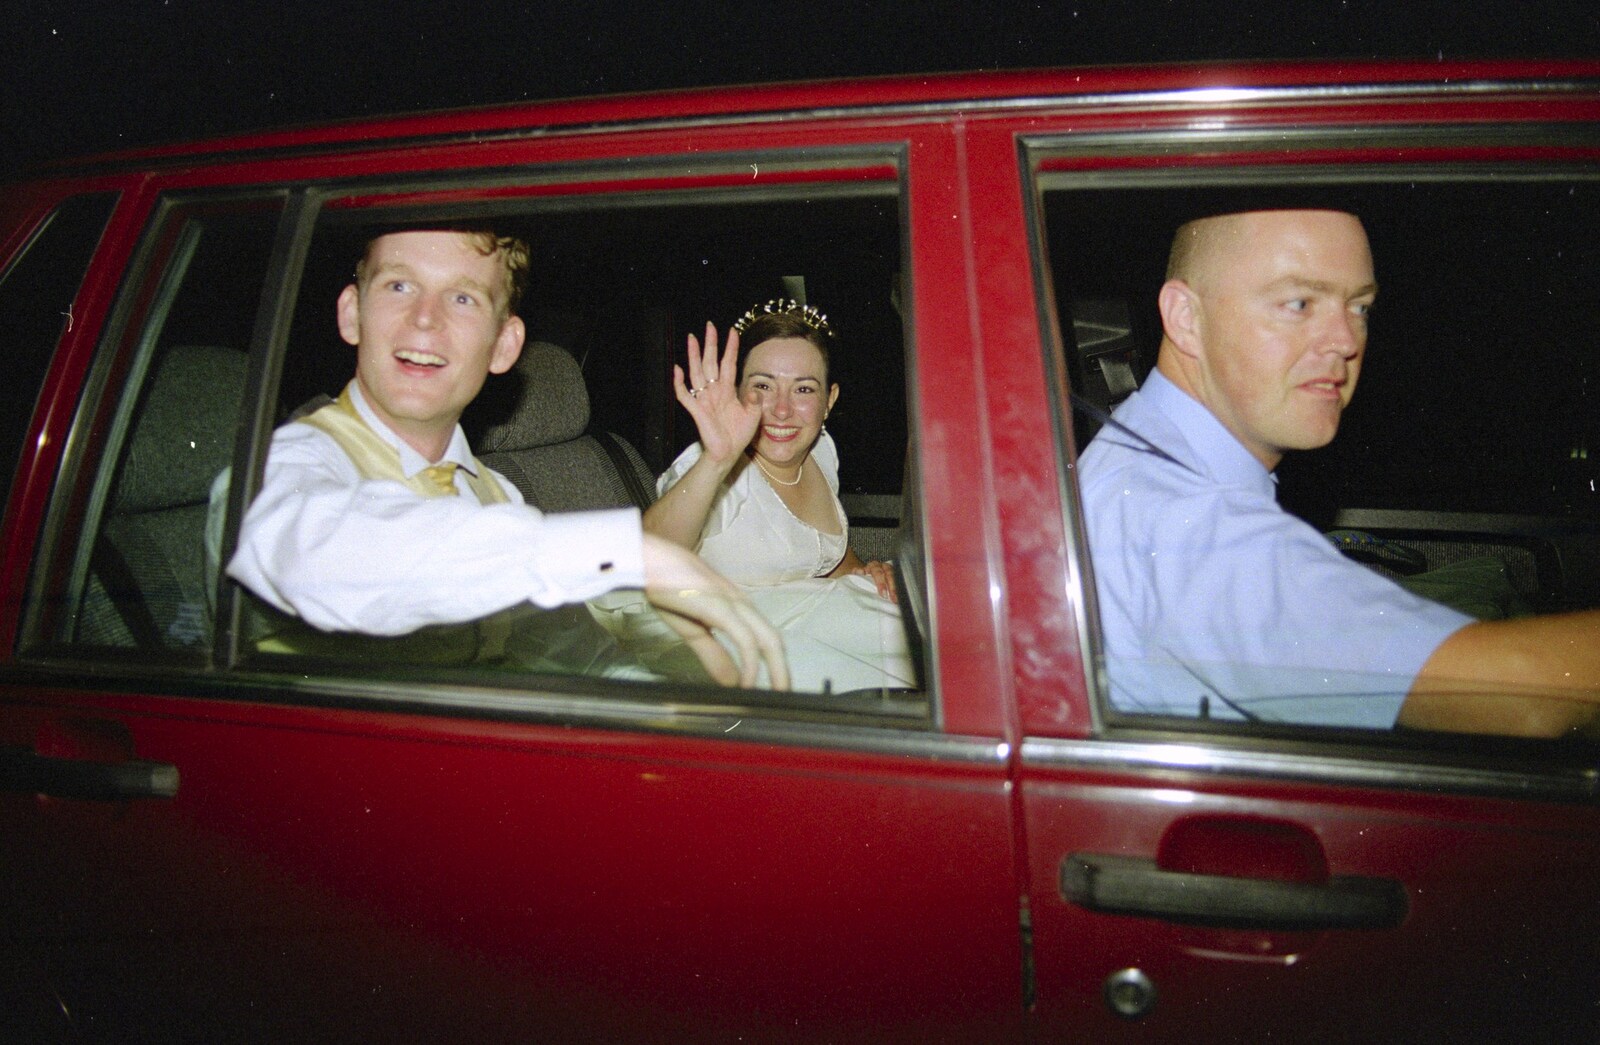 Lesley waves as they're driven away from Joe and Lesley's CISU Wedding, Ipswich, Suffolk - 30th July 1998